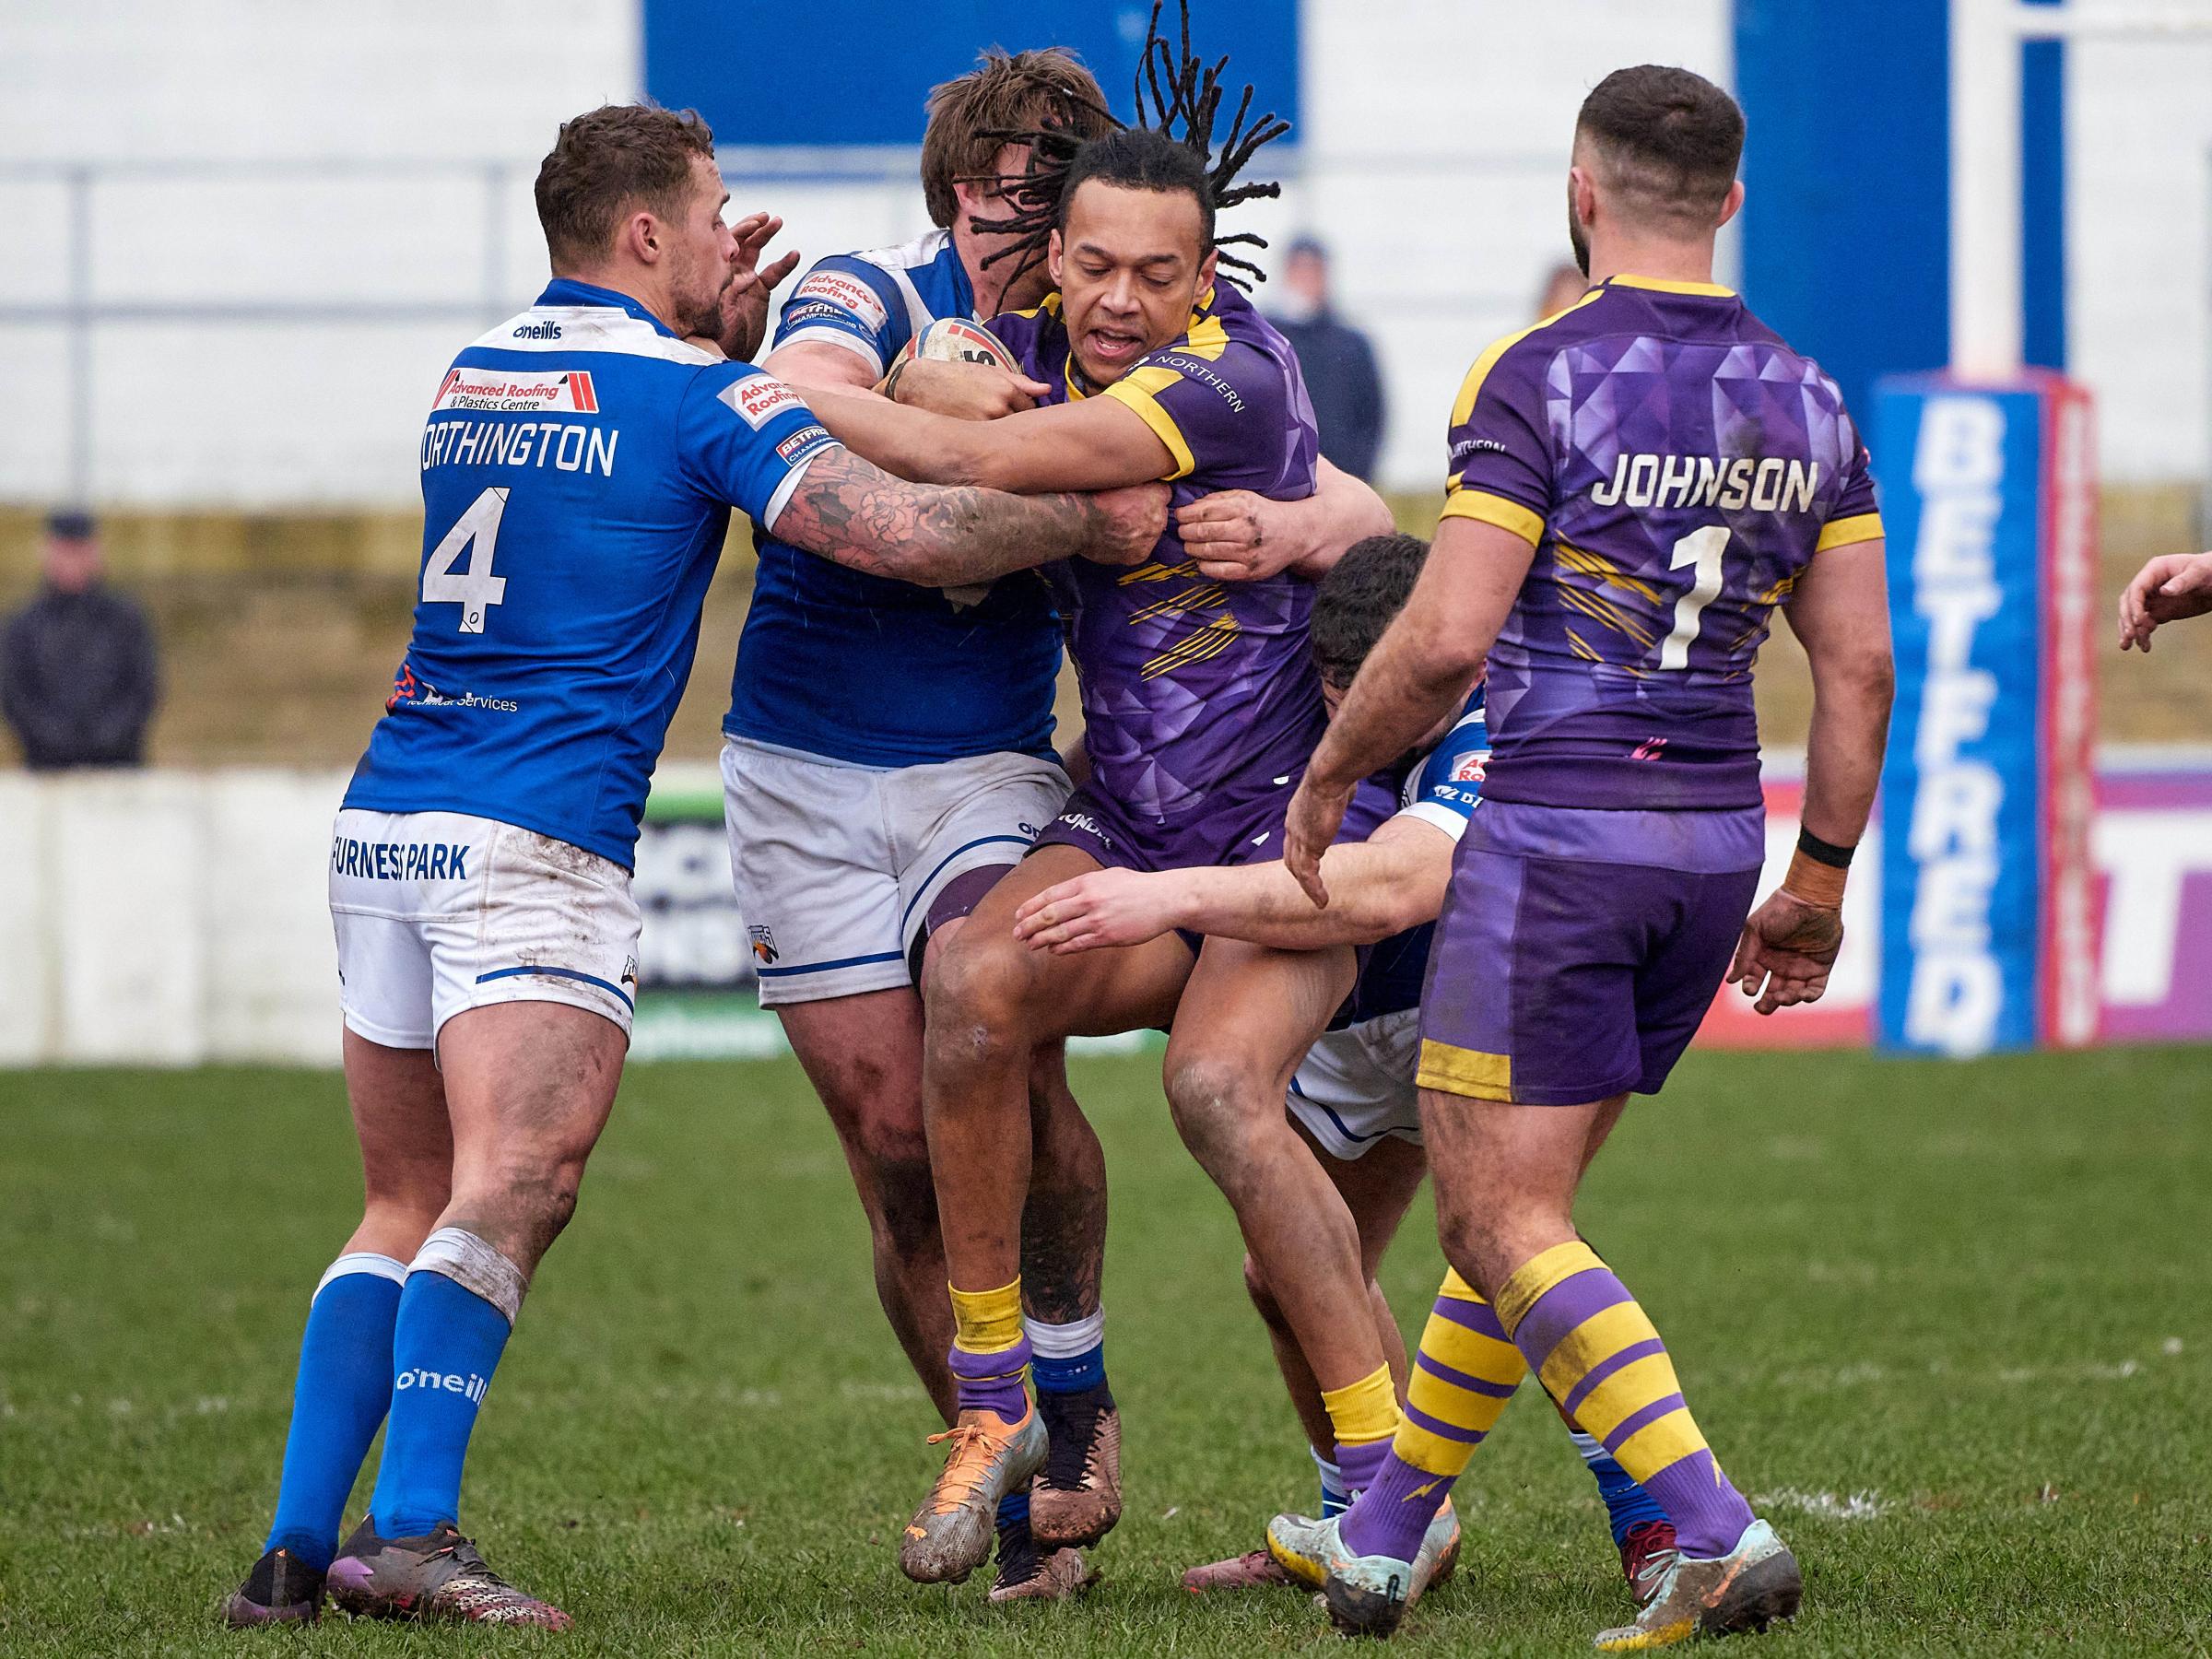 Barrow Raiders v Newcastle Thunder in the Betfred Championship, 5th March 2023